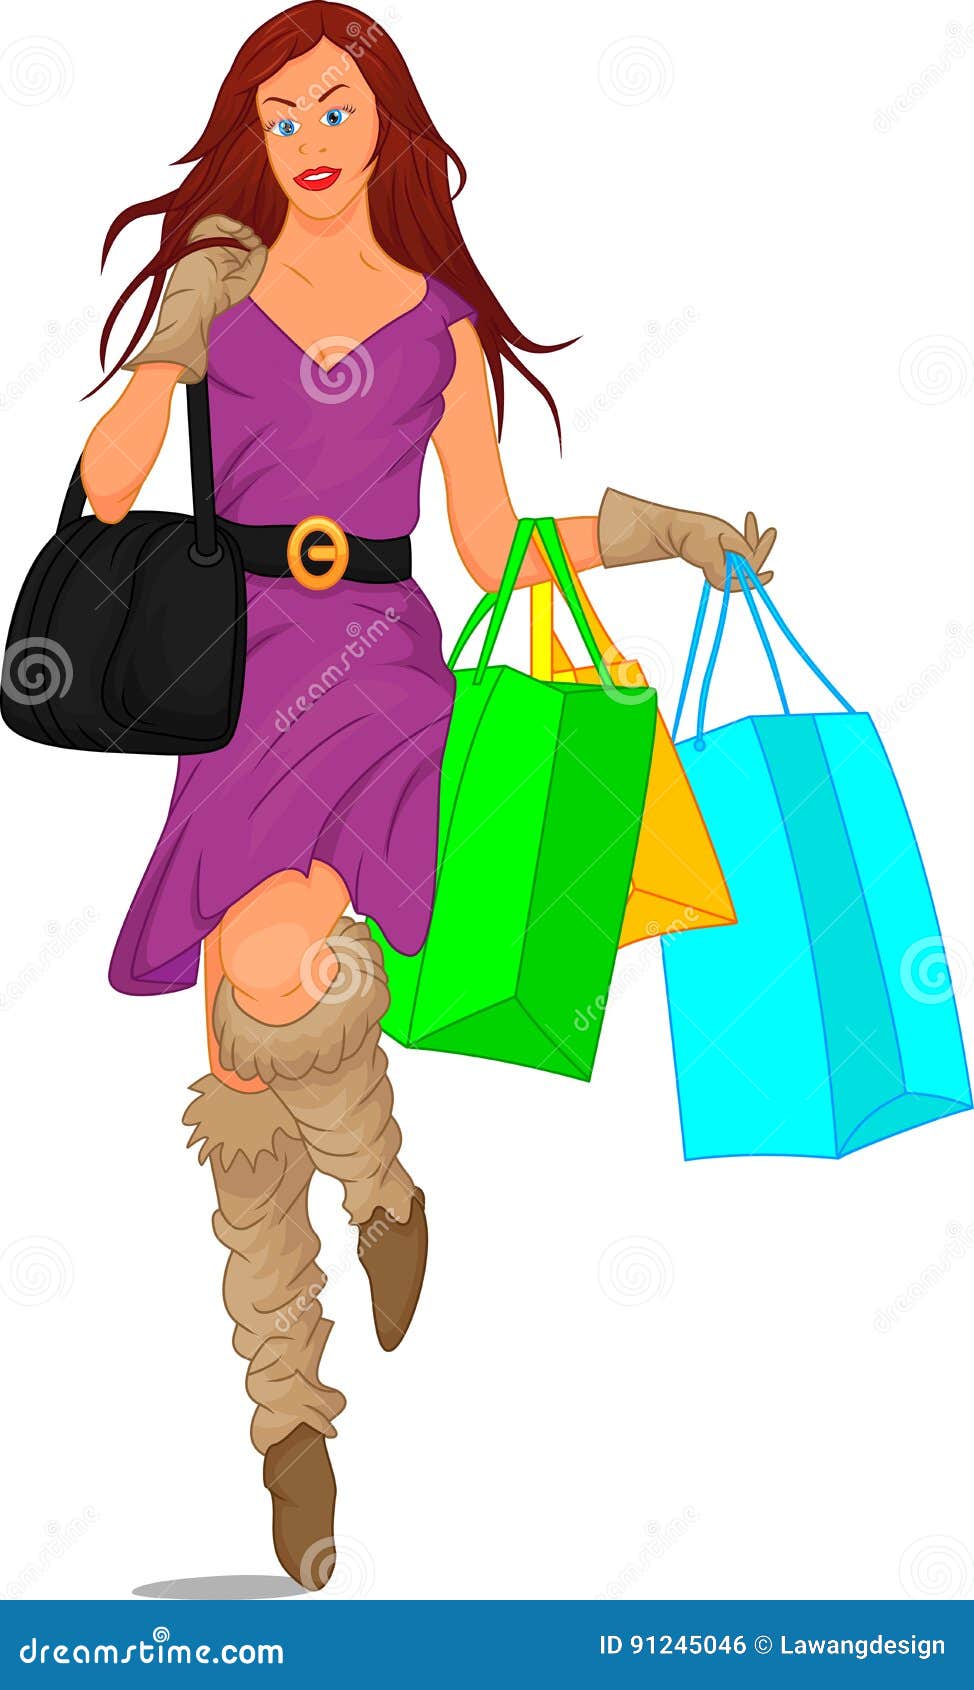 Cute Girl with Shopping Bags Stock Vector - Illustration of nature ...